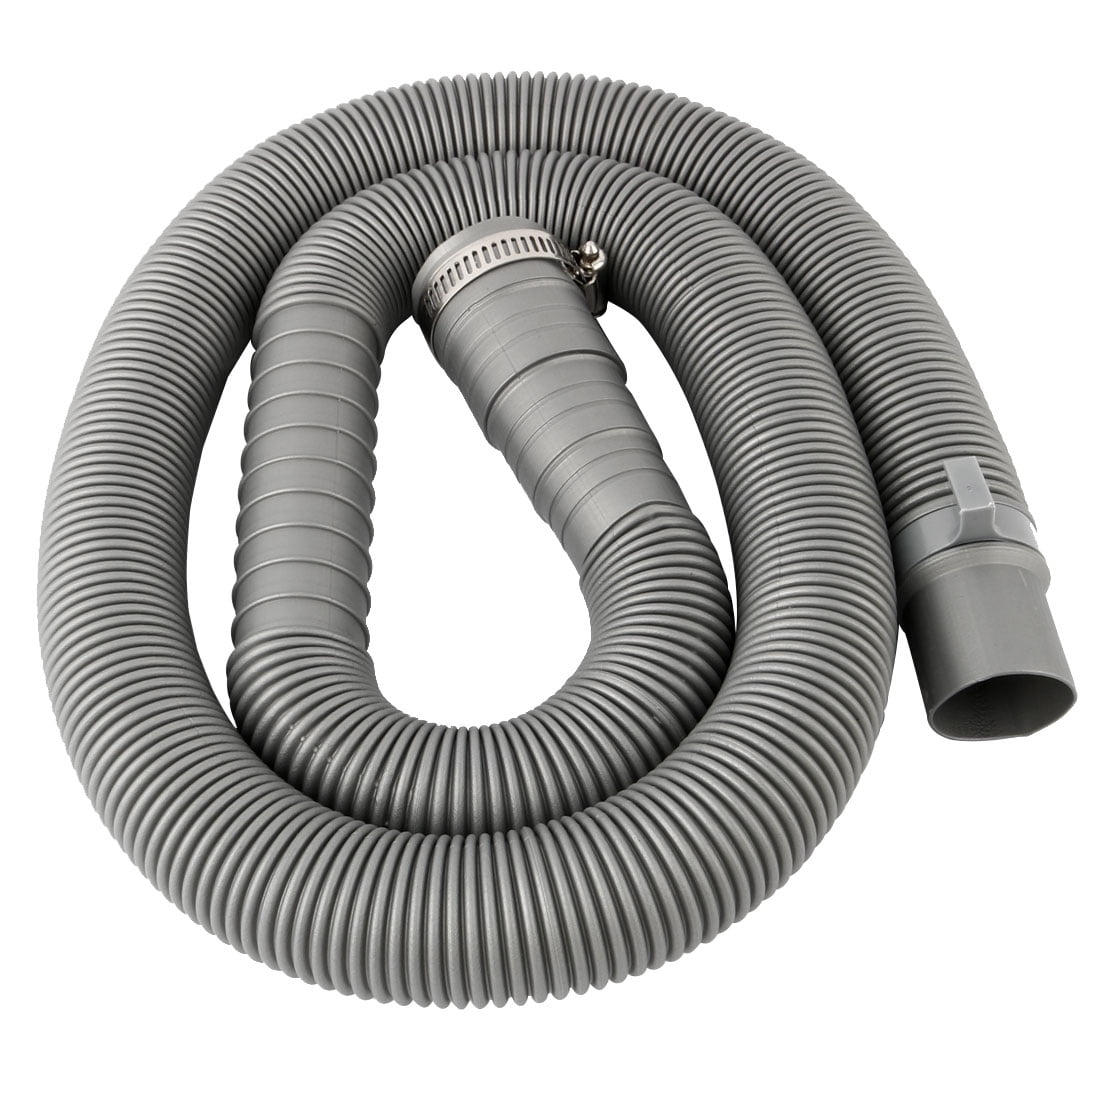 Details about   Washer Drain Hose Extension Kit 8FT Universal Drainage Hose 1" to 1-1/4" 1-1/8" 